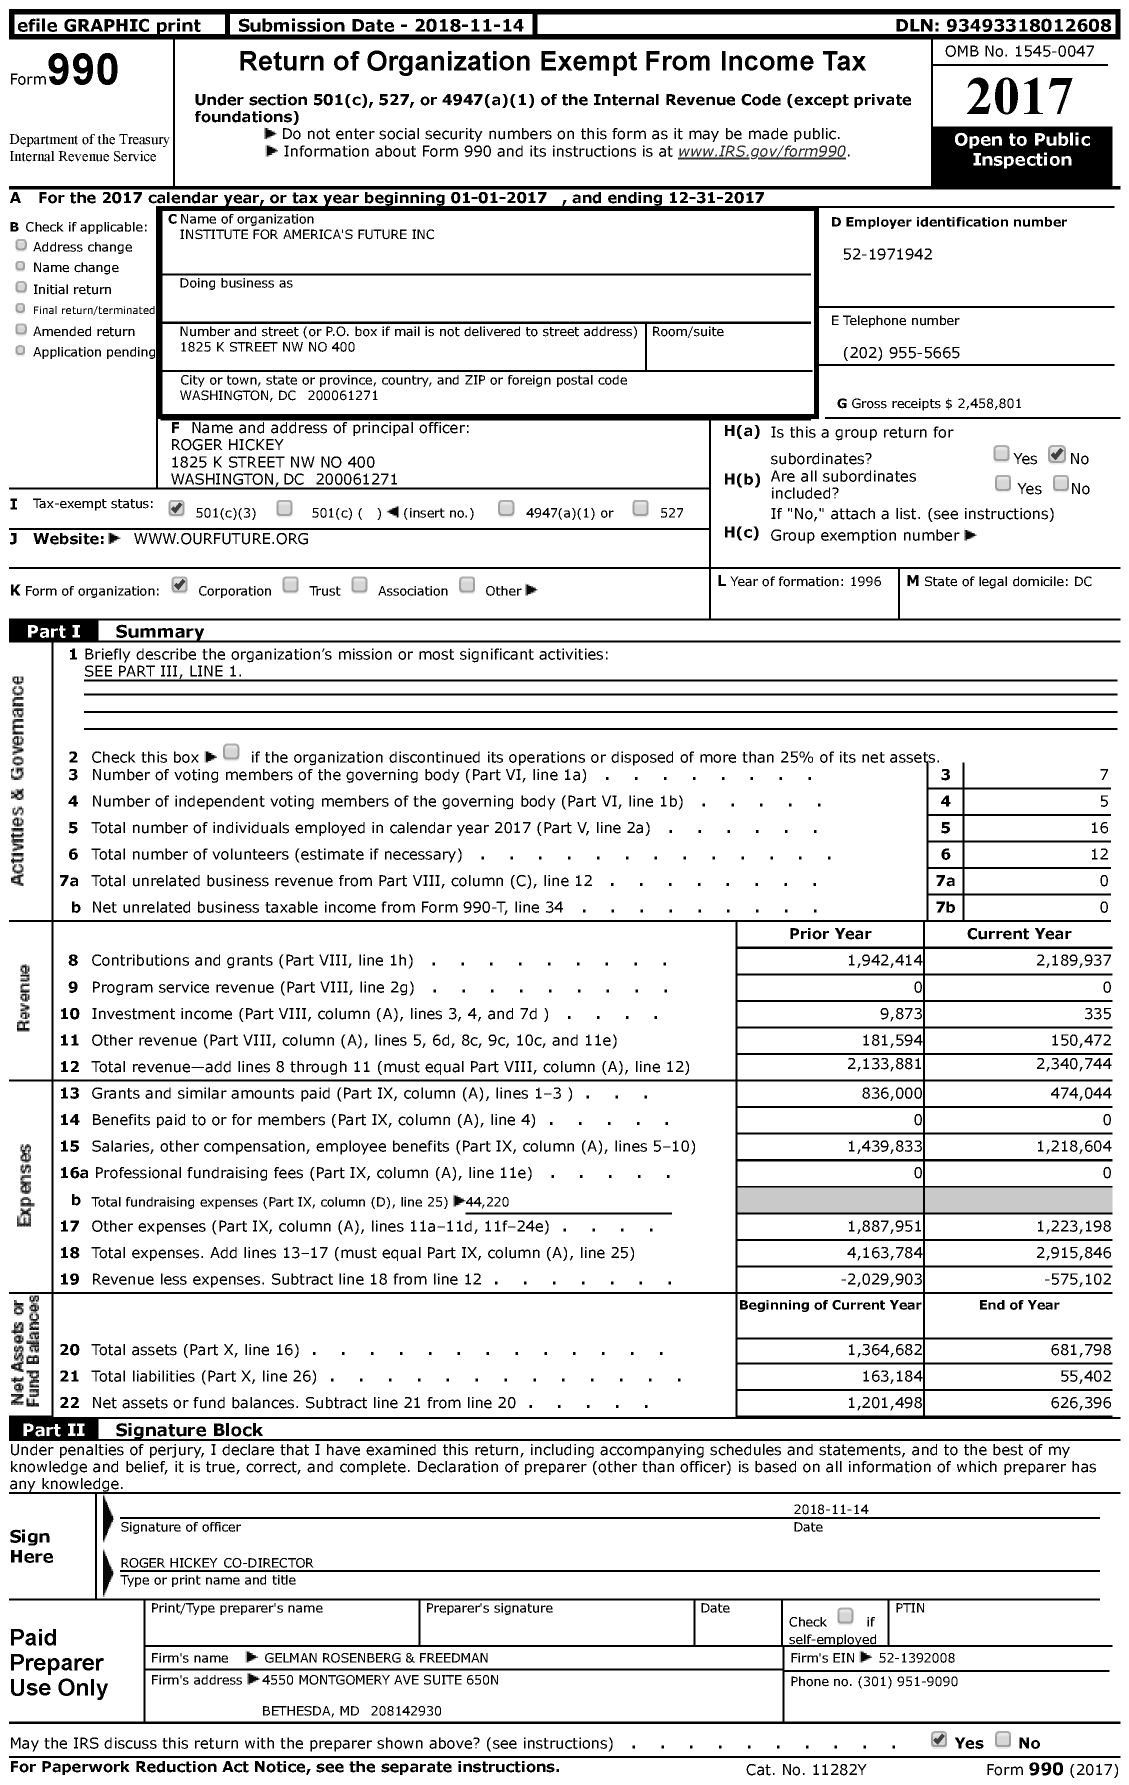 Image of first page of 2017 Form 990 for Institute for America's Future